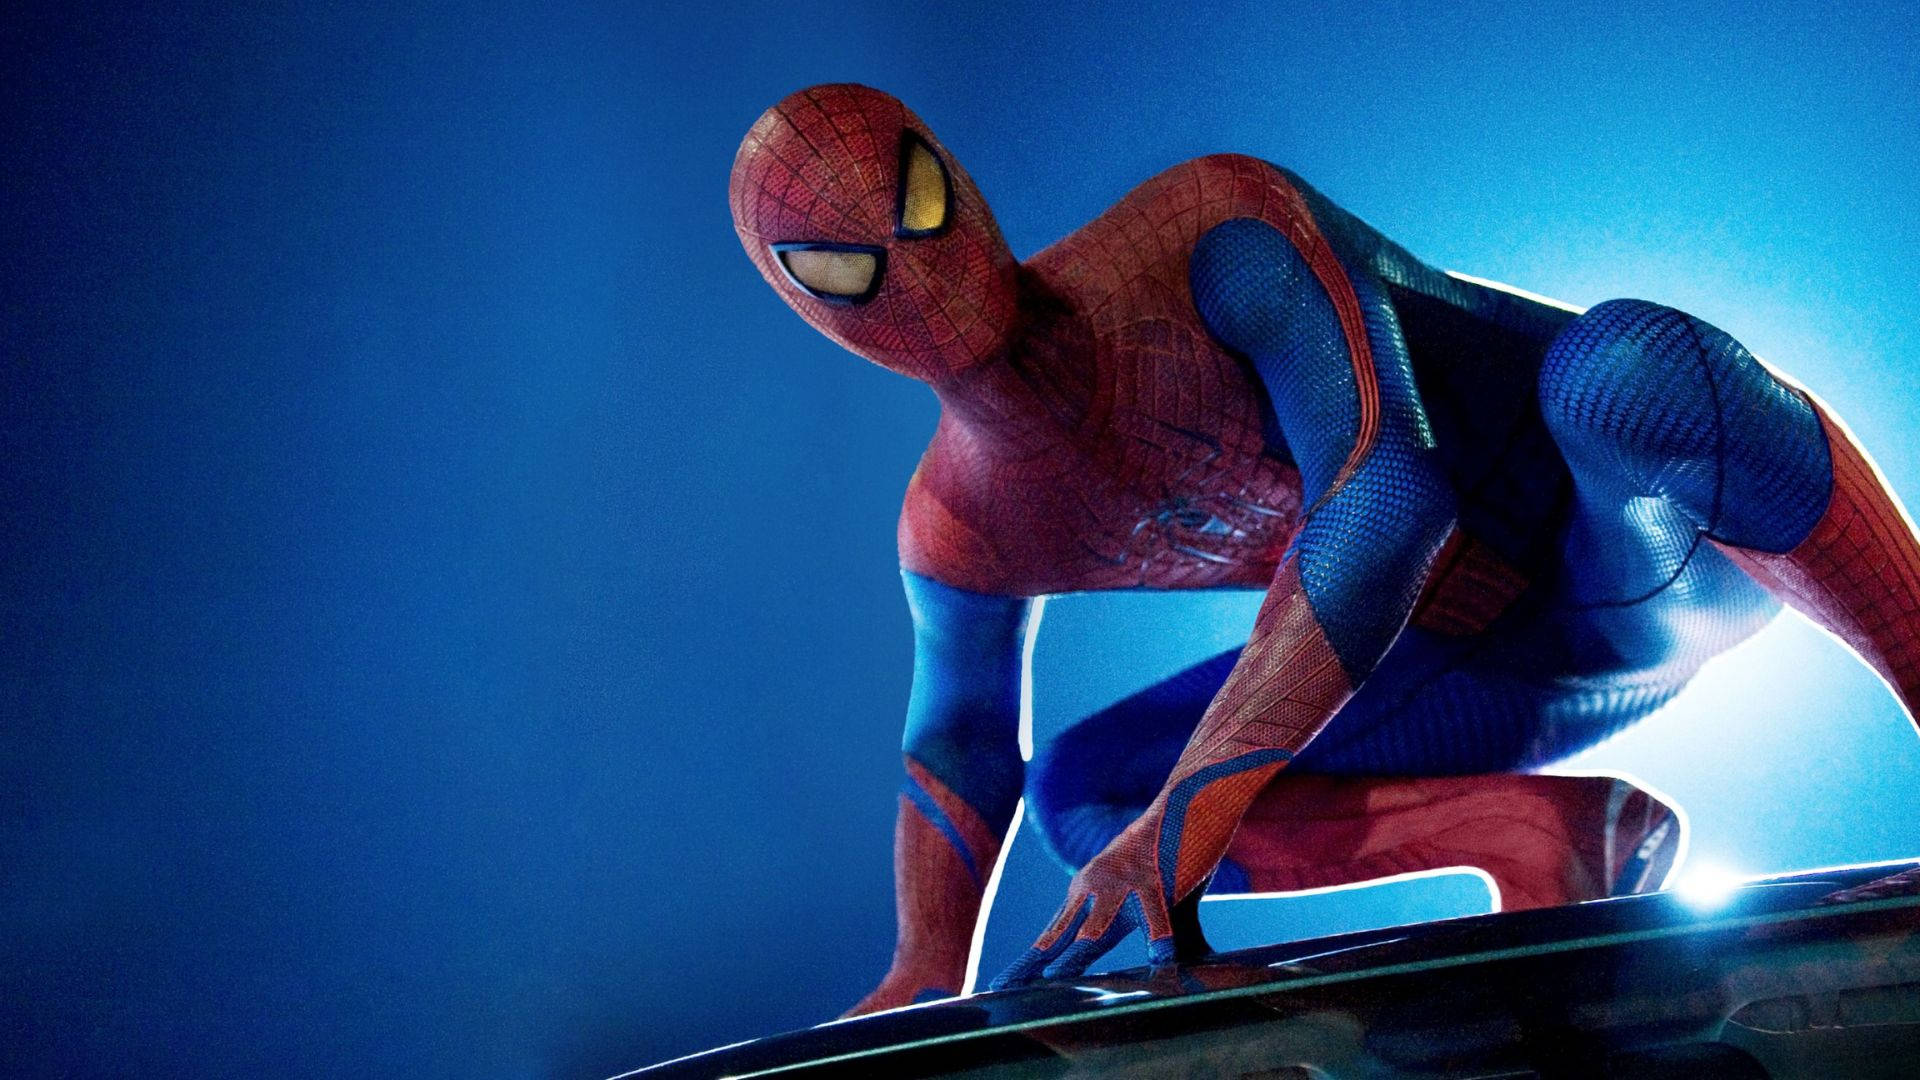 4k Spiderman On Roof Background